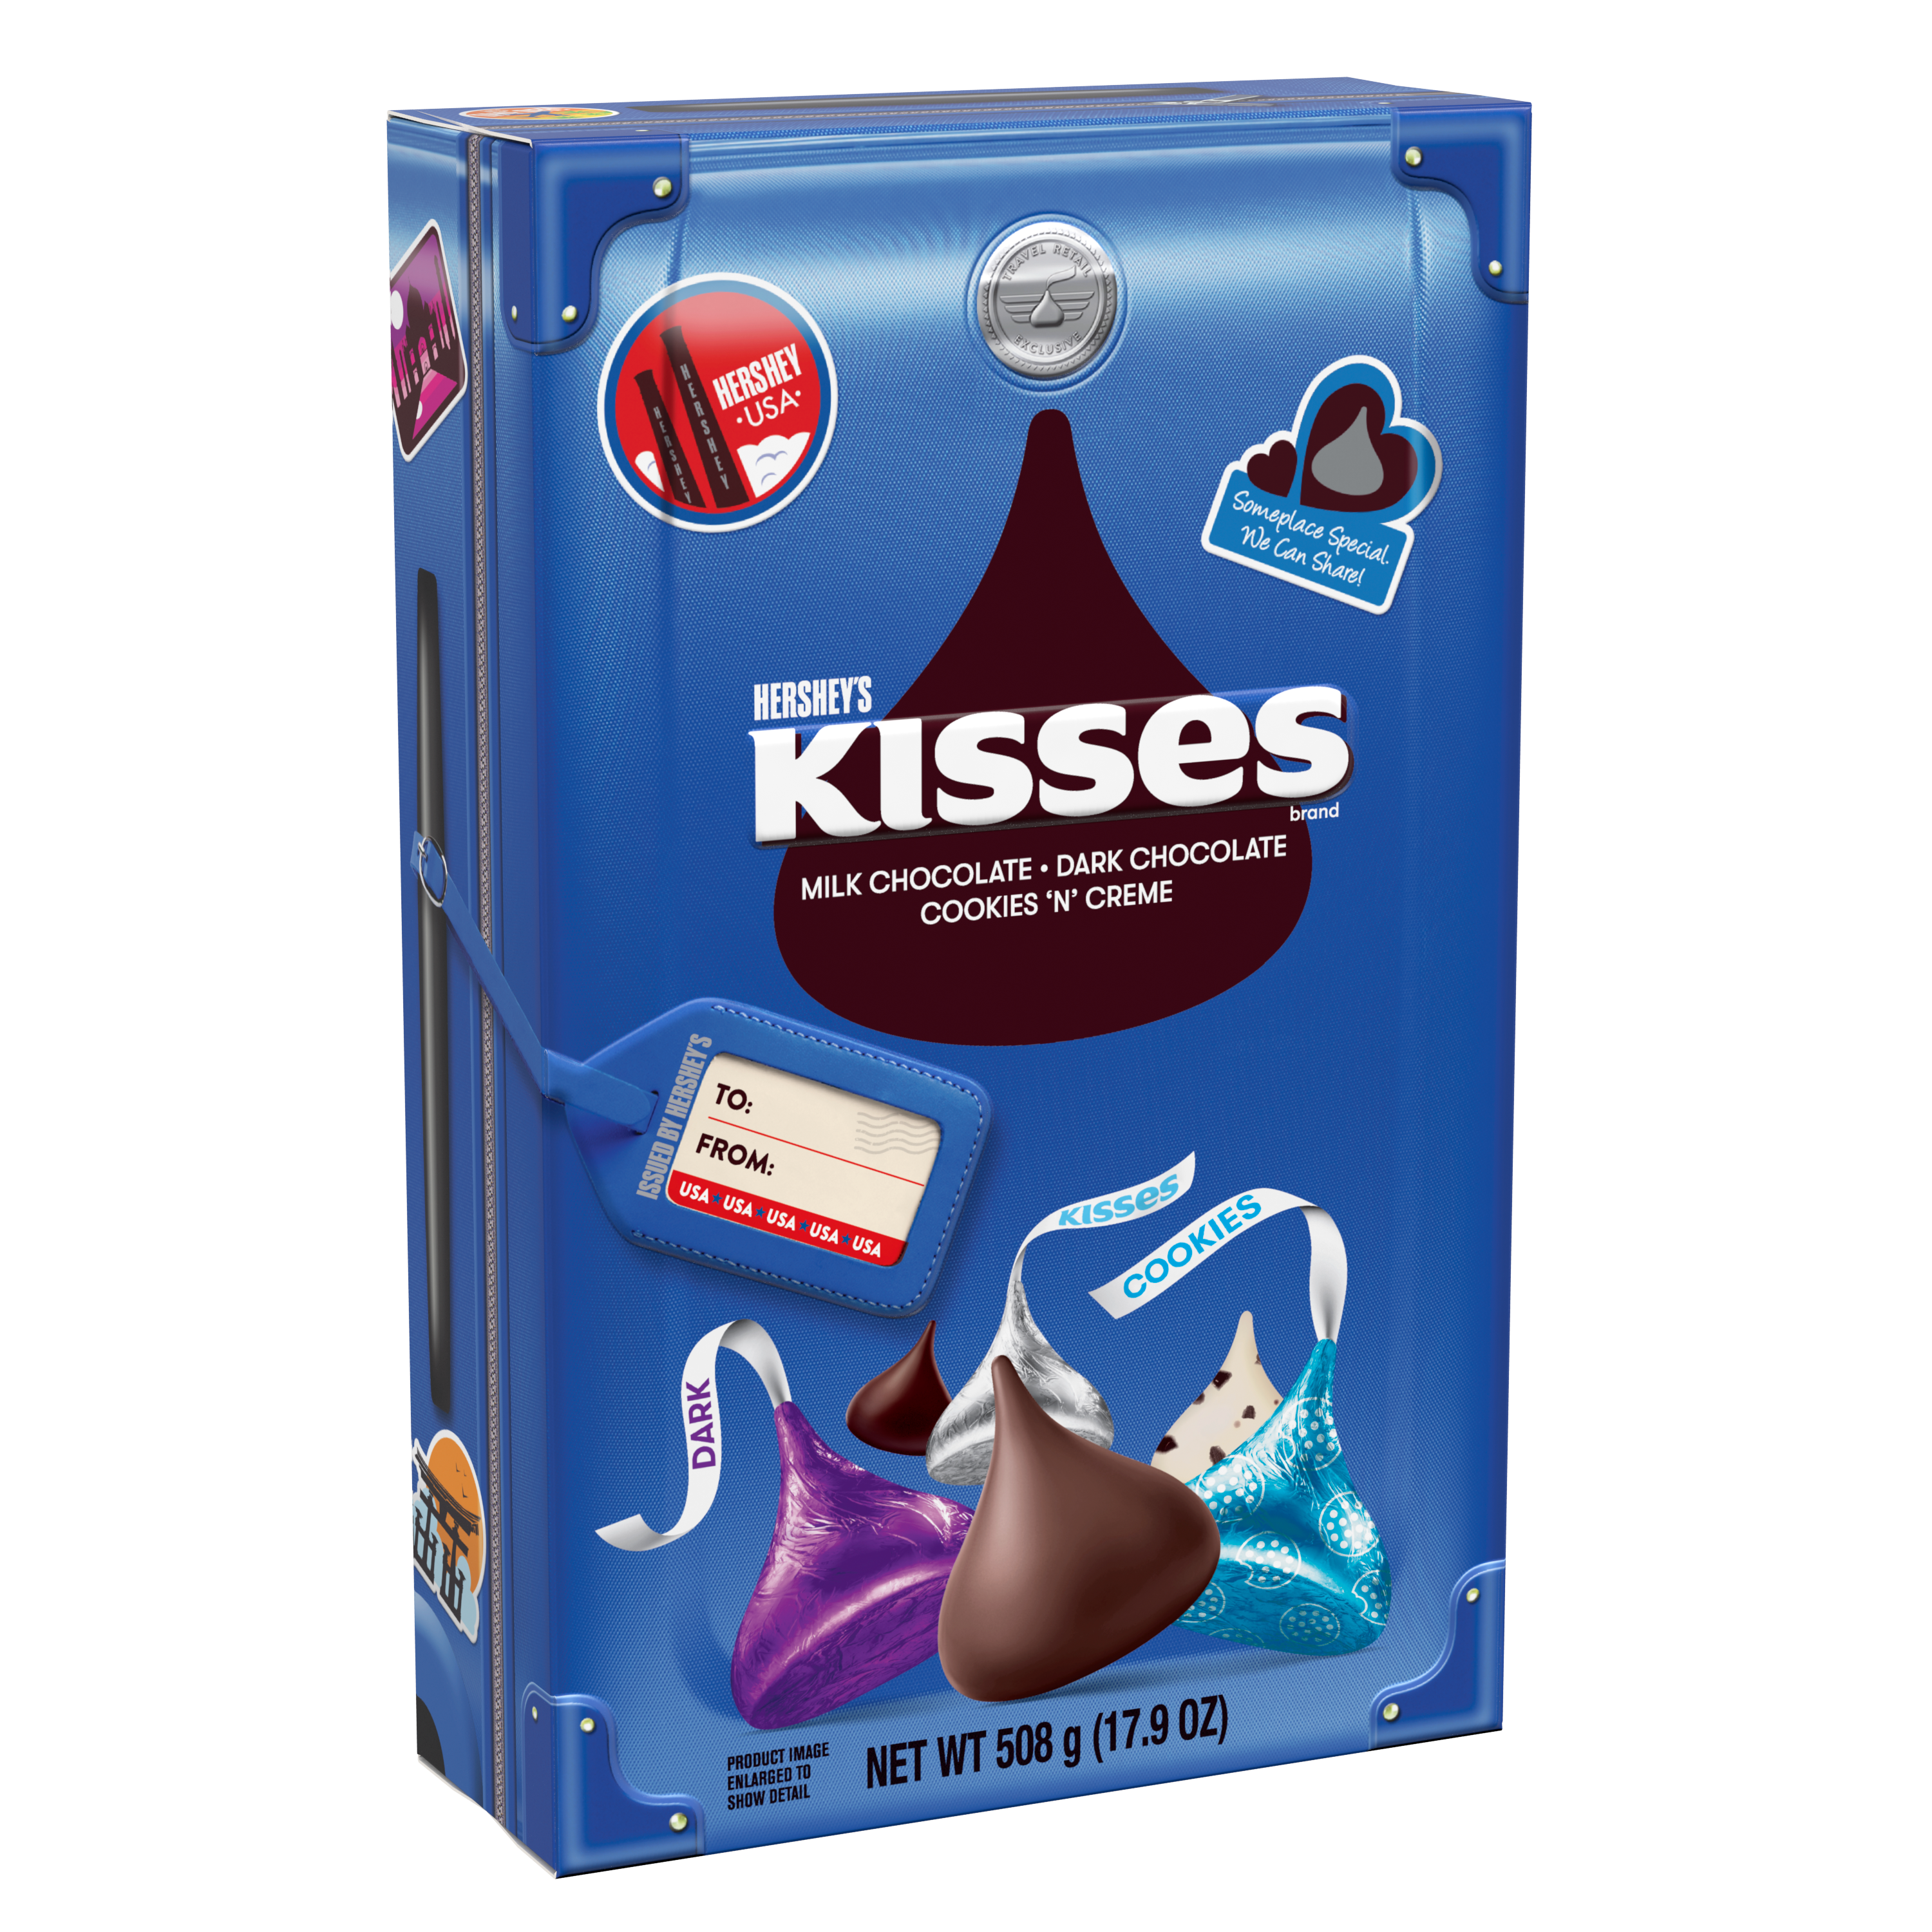 HERSHEY'S KISSES World Traveler Collection Assortment, 17.9 oz box - Left Side of Package